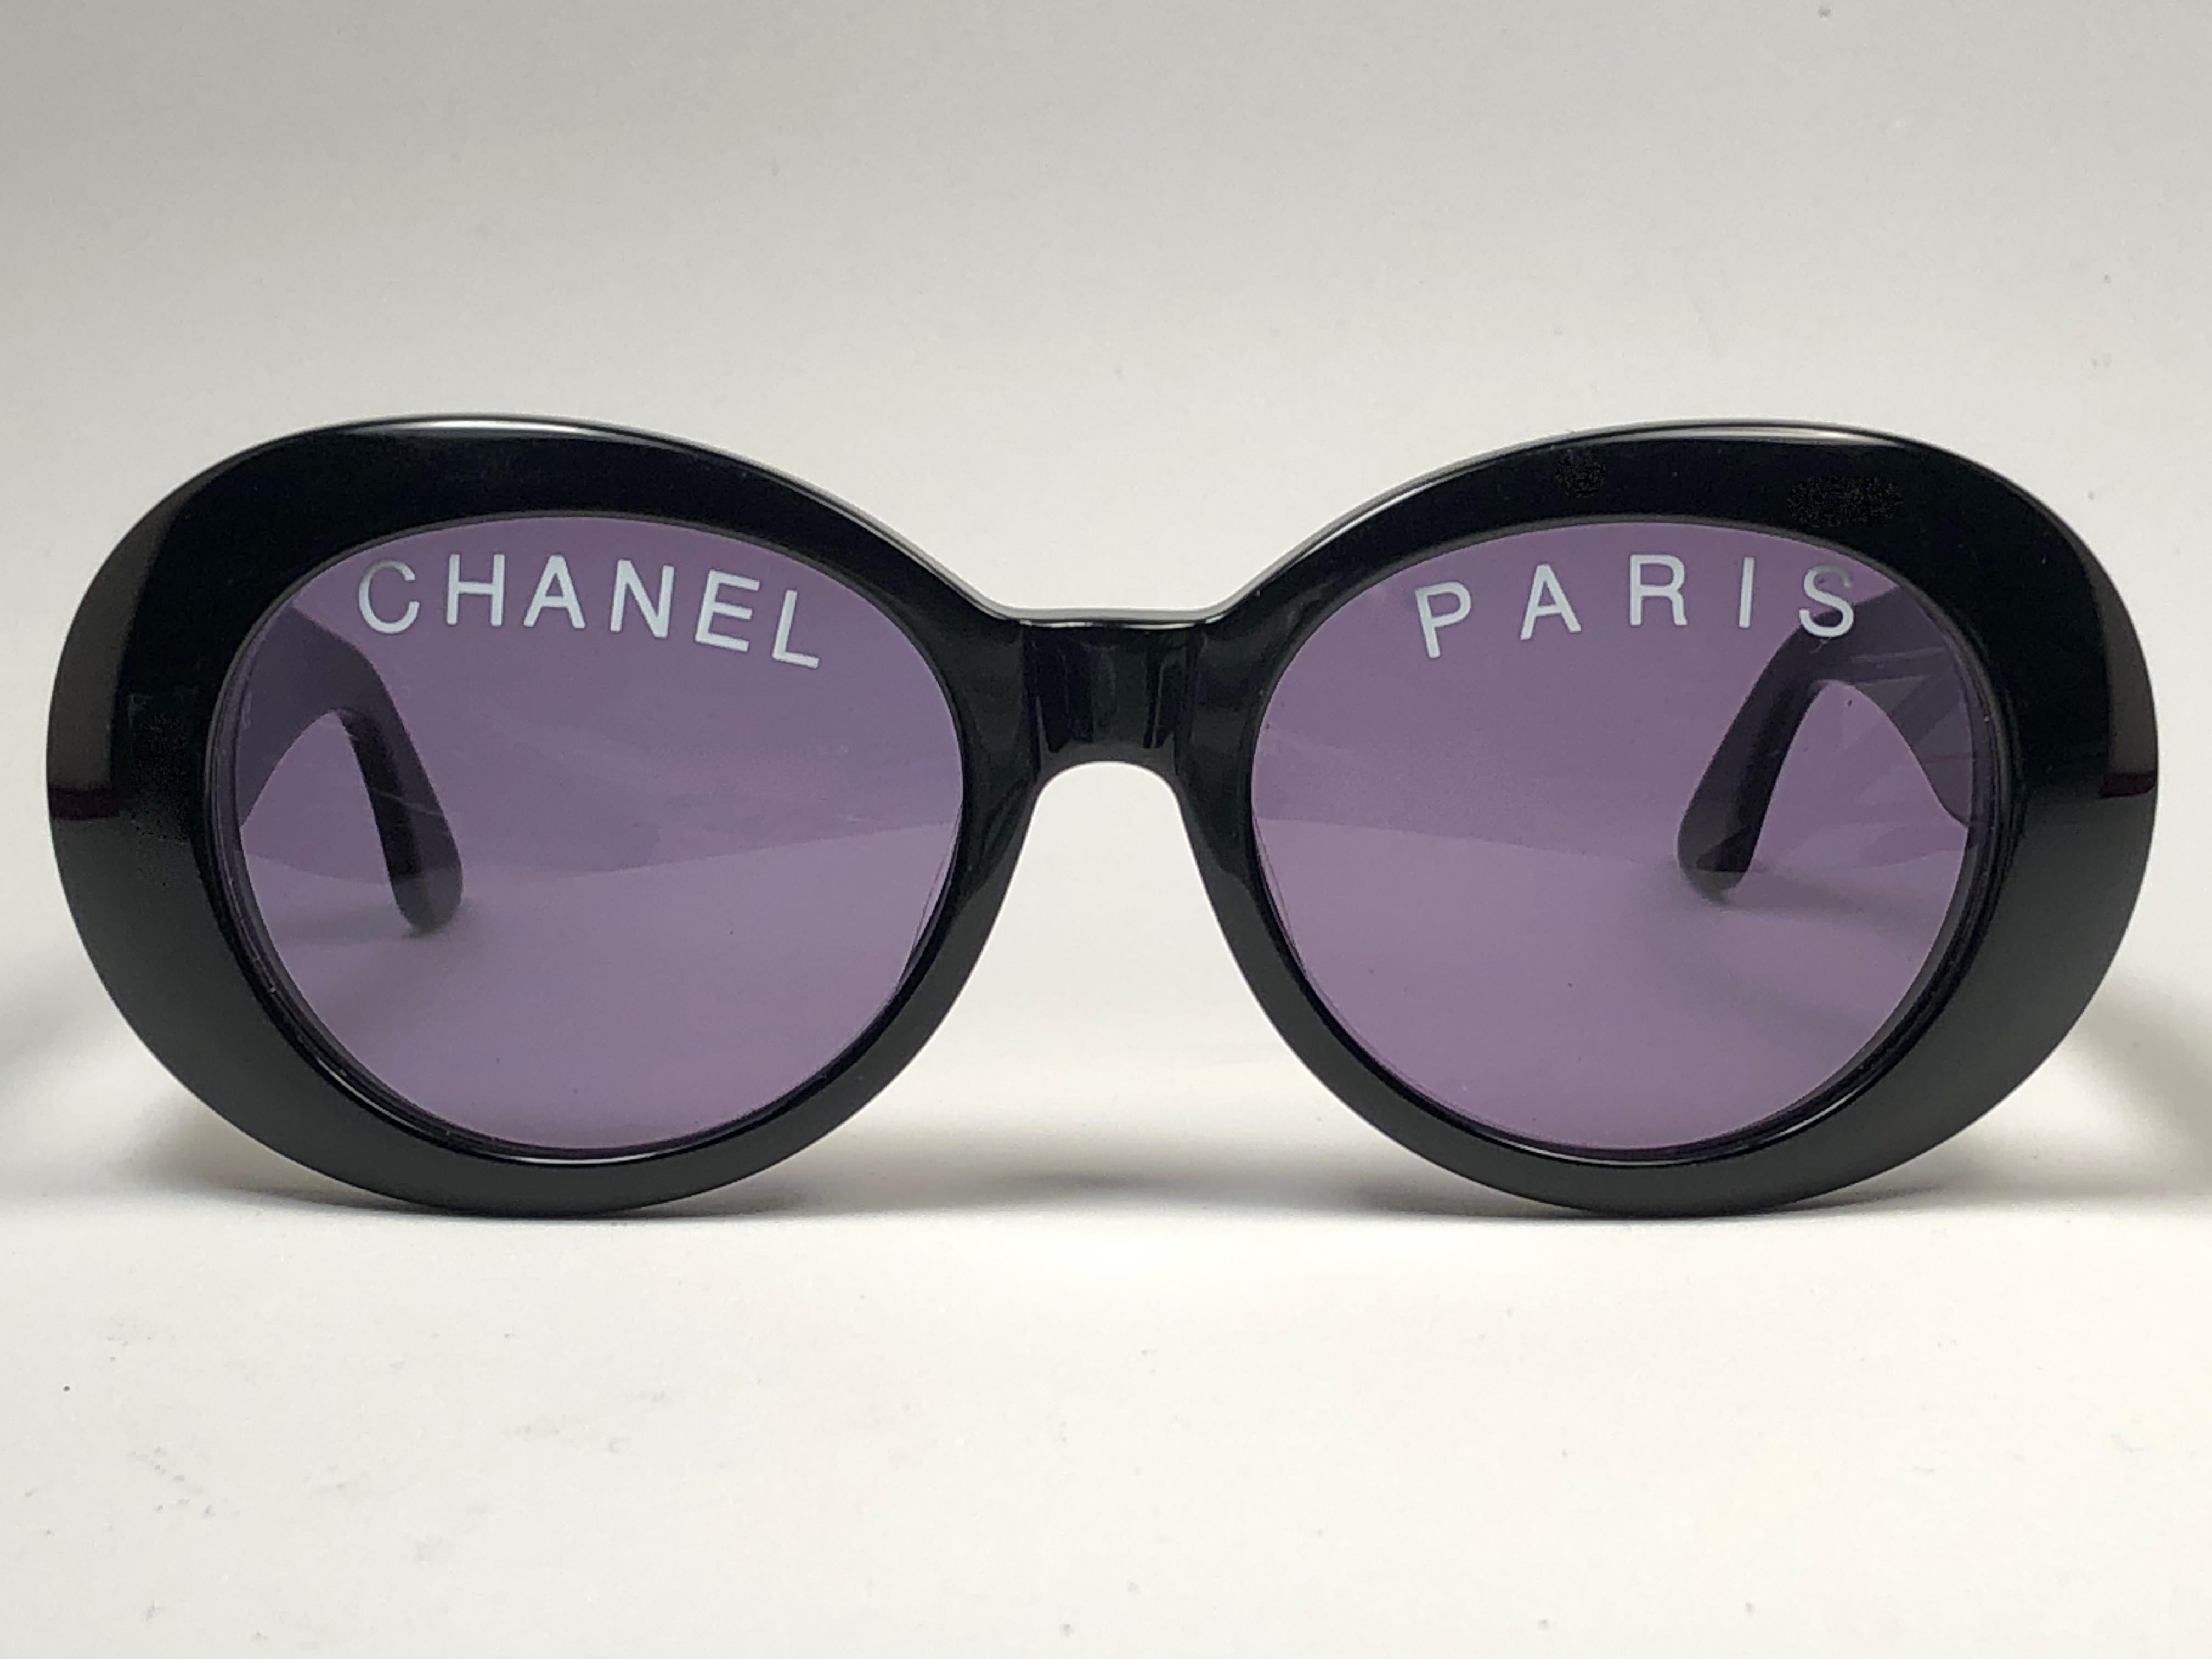 New Rare Chanel sunglasses form the collection Spring Summer 1993.

A seldom and unique piece in this new, never displayed or worn condition.

This pair of Chanel sunglasses is an absolute showstopper.

This pair may show minor sign of wear due to